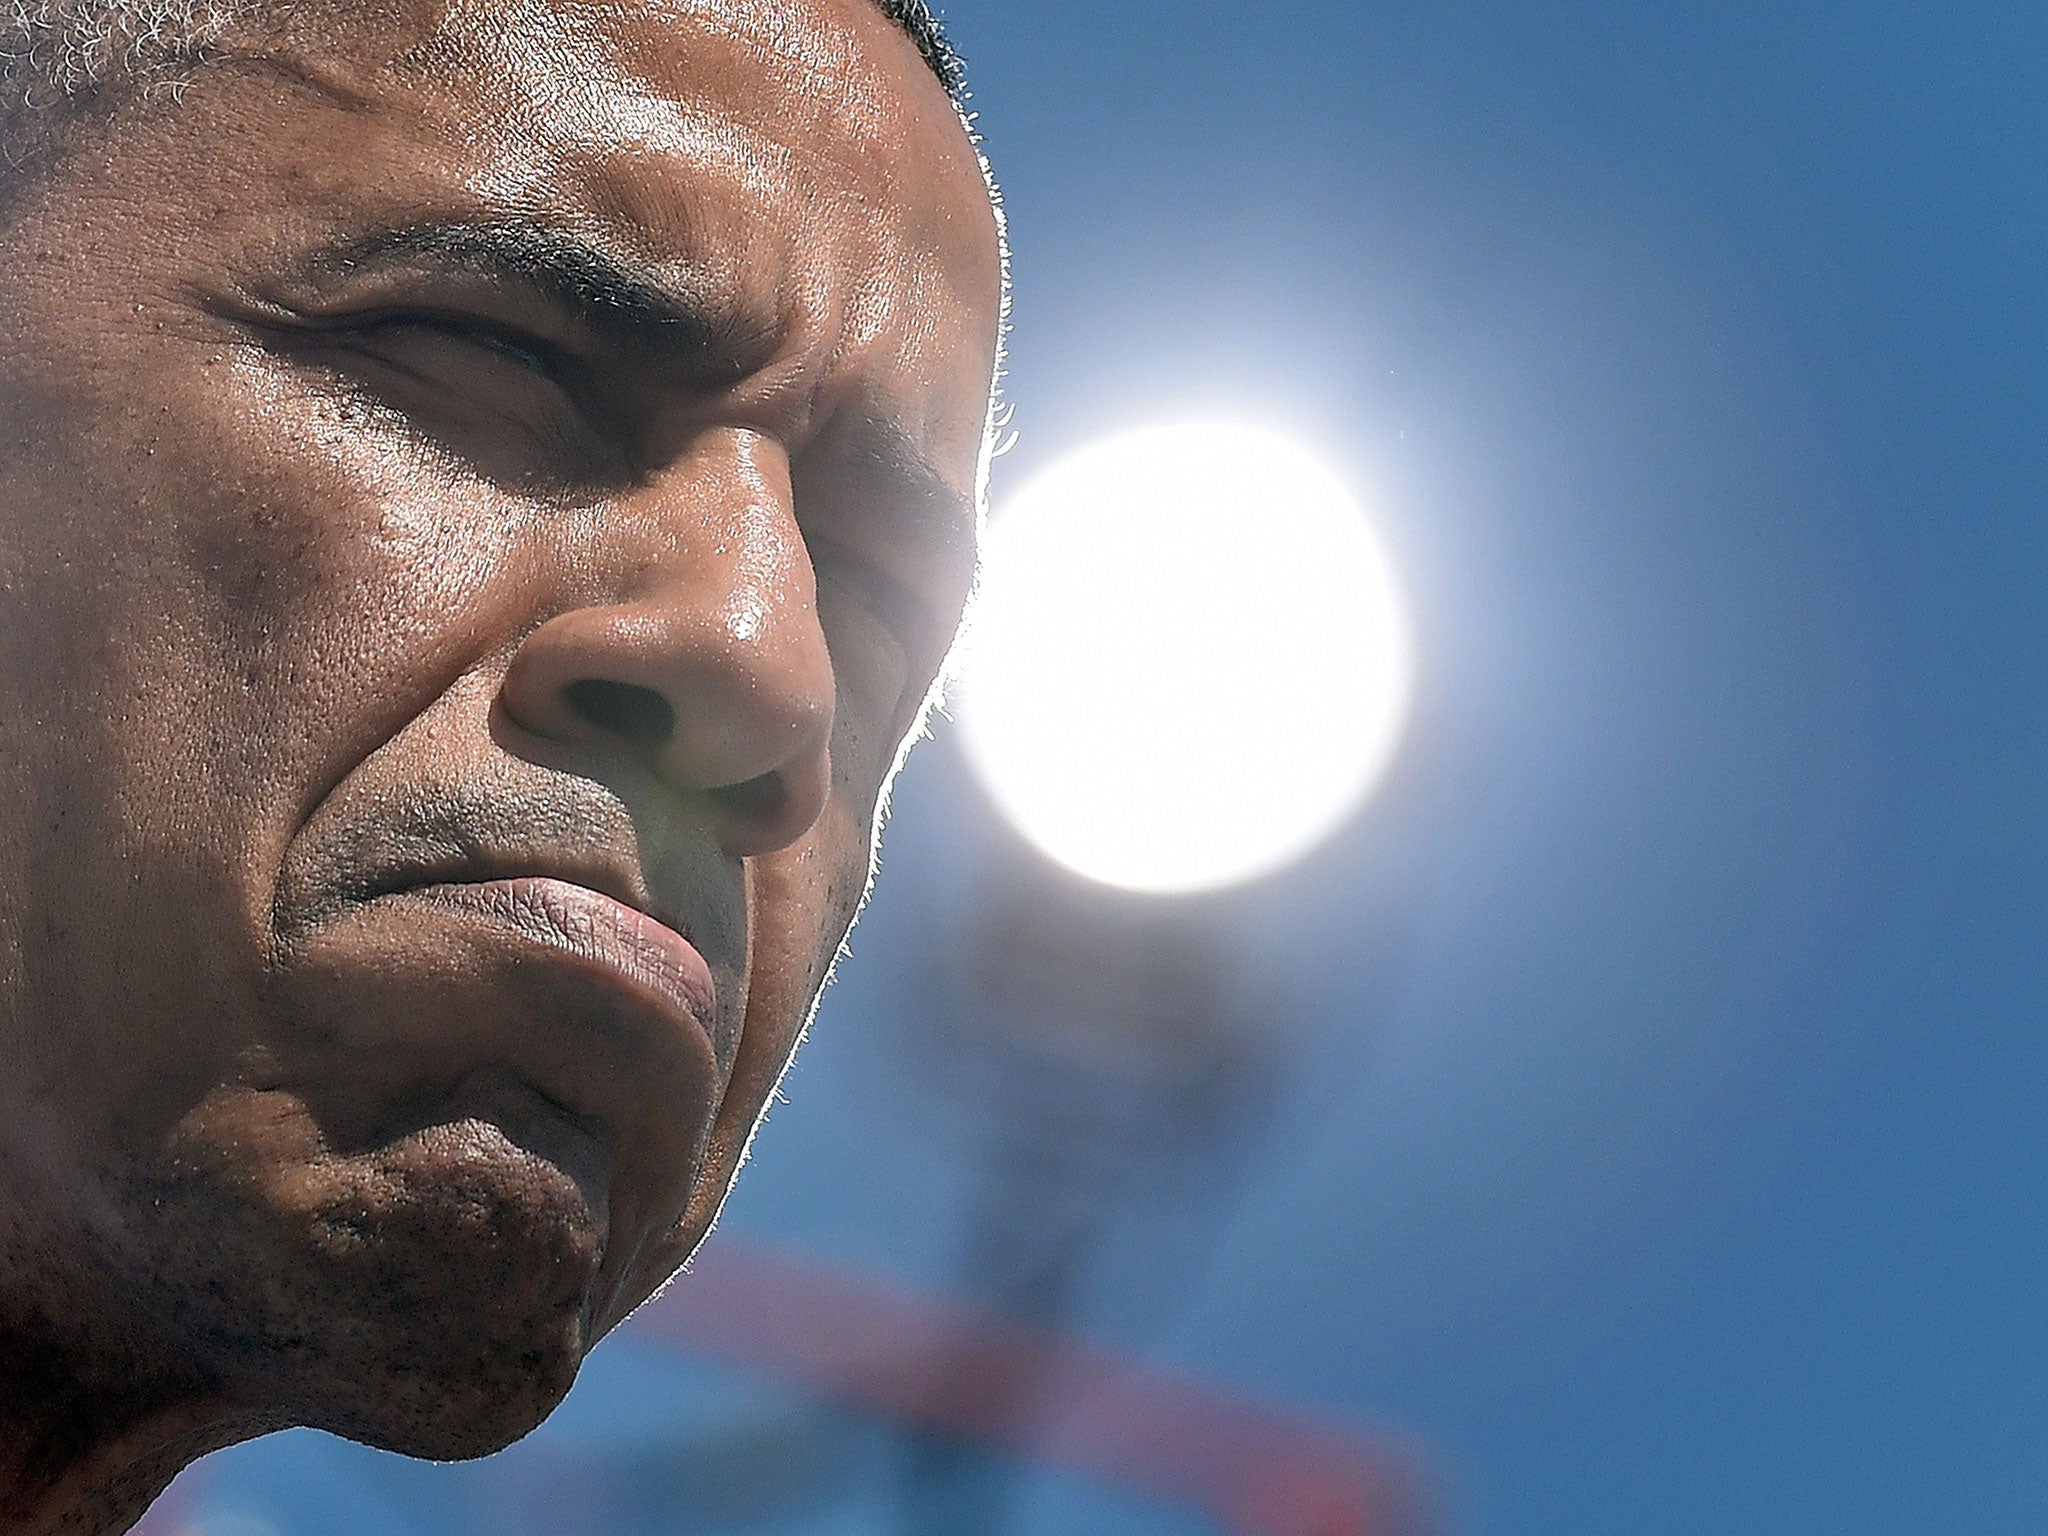 US President Barack Obama is worried that the conflict in Gaza could lead to many more deaths